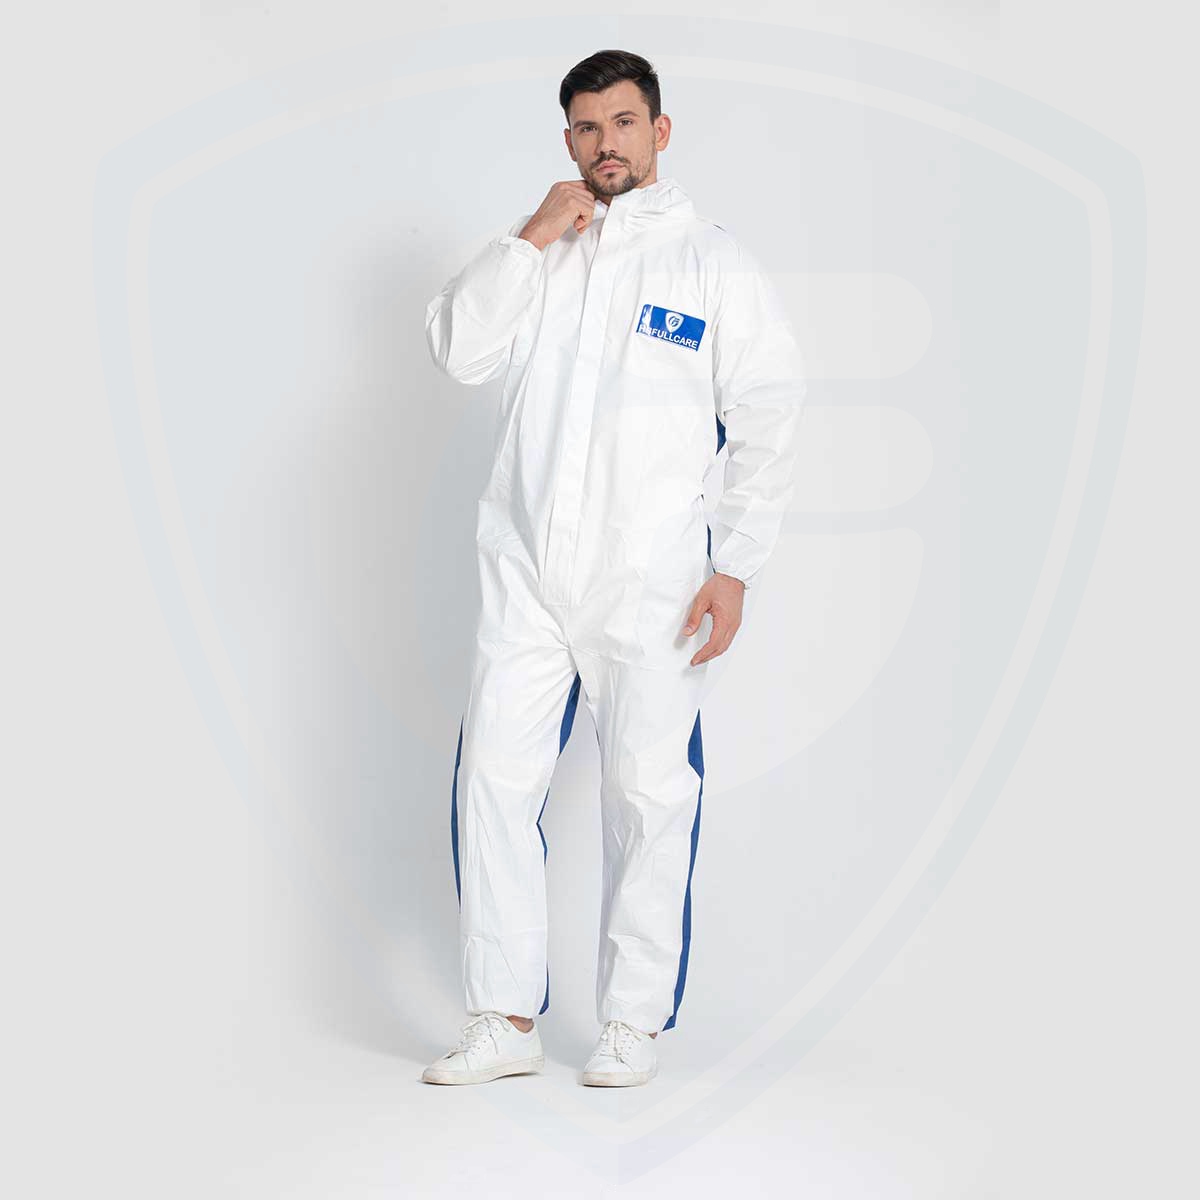 Disposable Full Body Hooded Coverall with Breathable SMS on Back